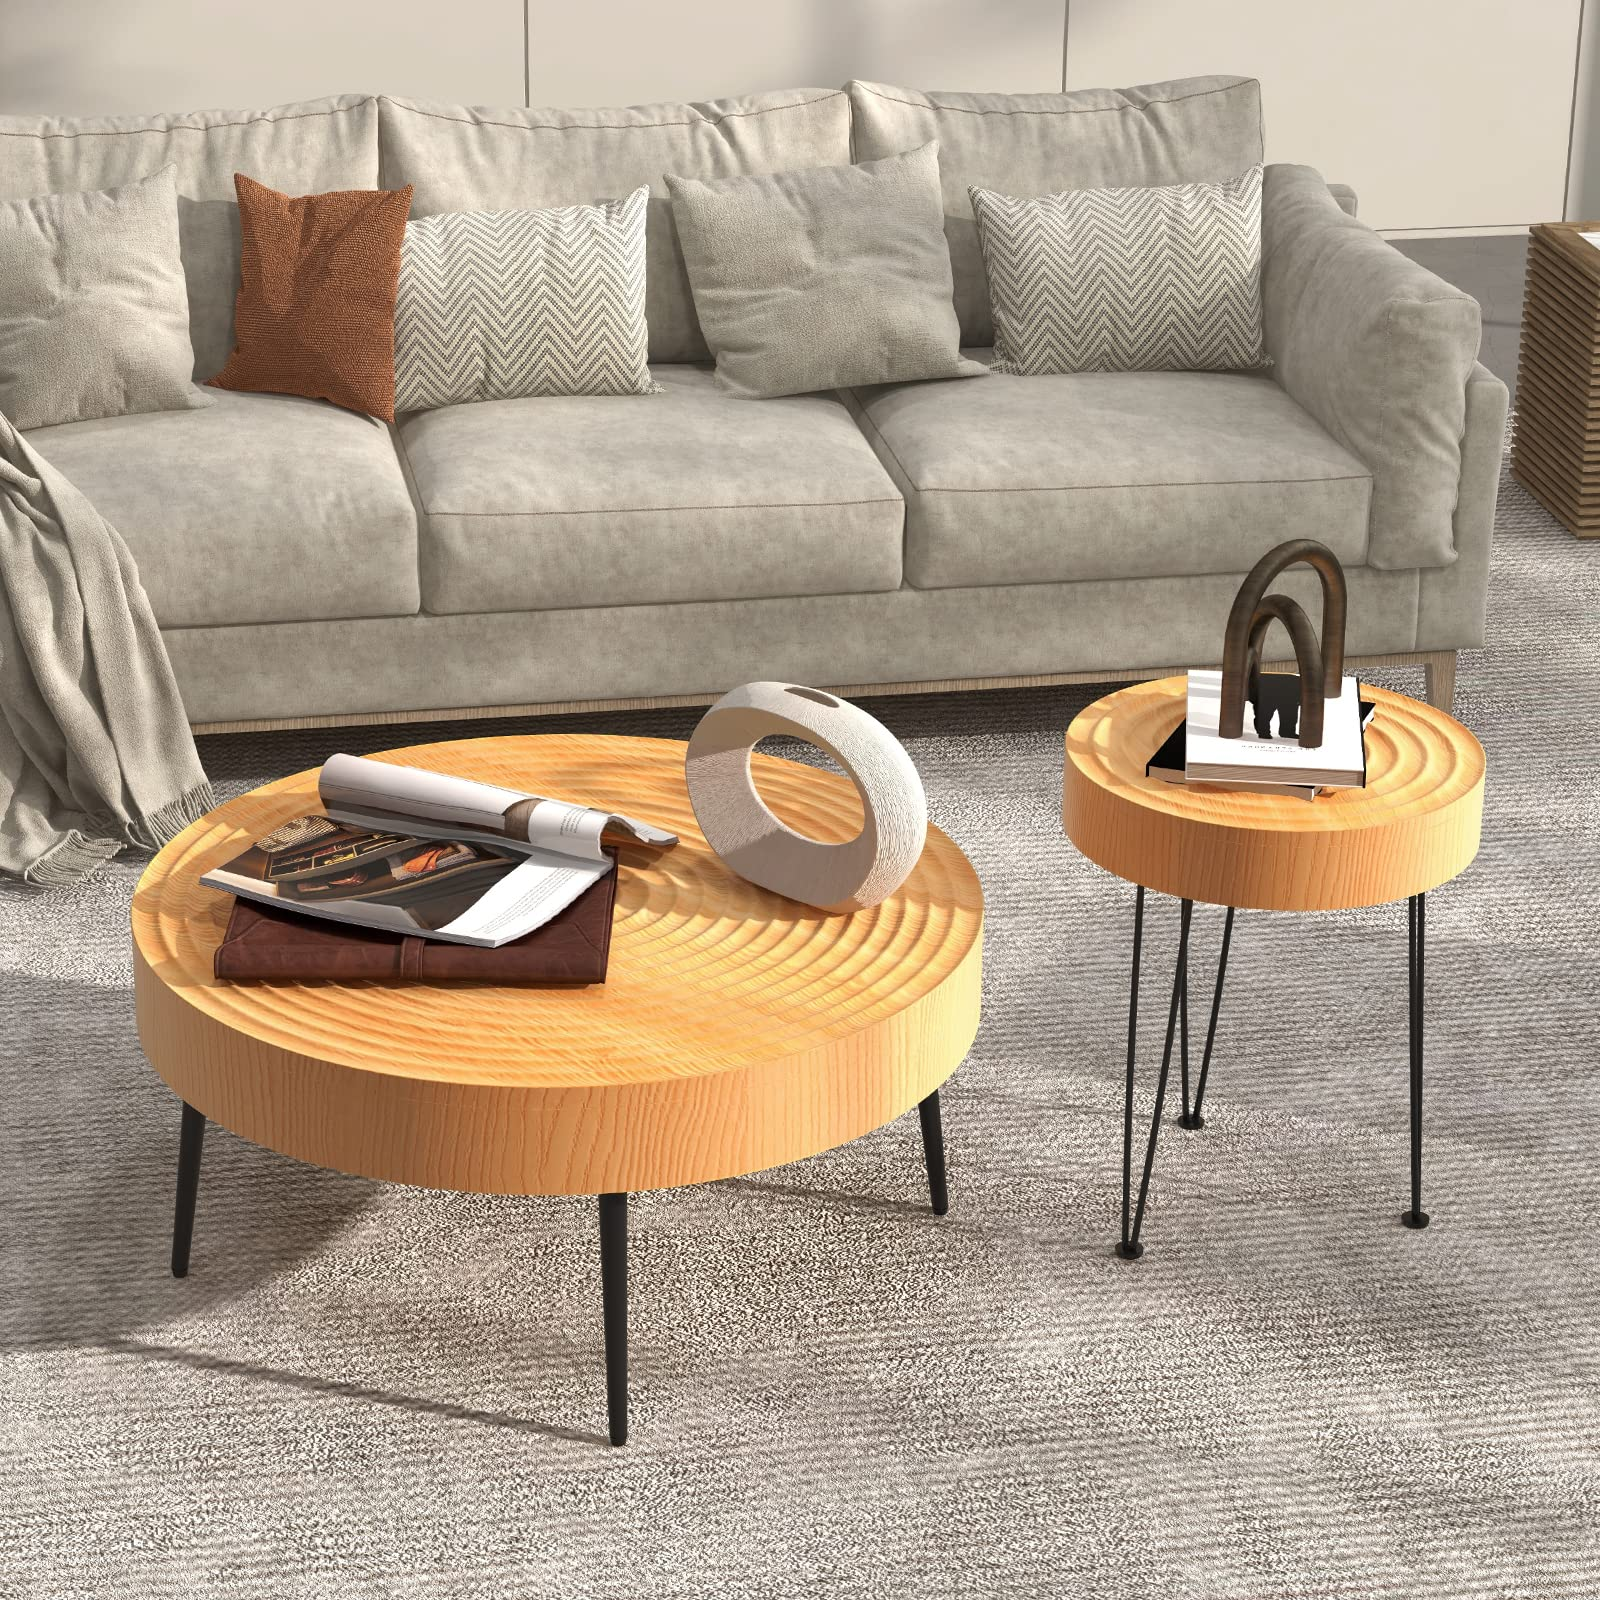 Giantex Round Coffee Table Set of 2 - Sofa Side Nesting Table w/Solid Pine Wood Top